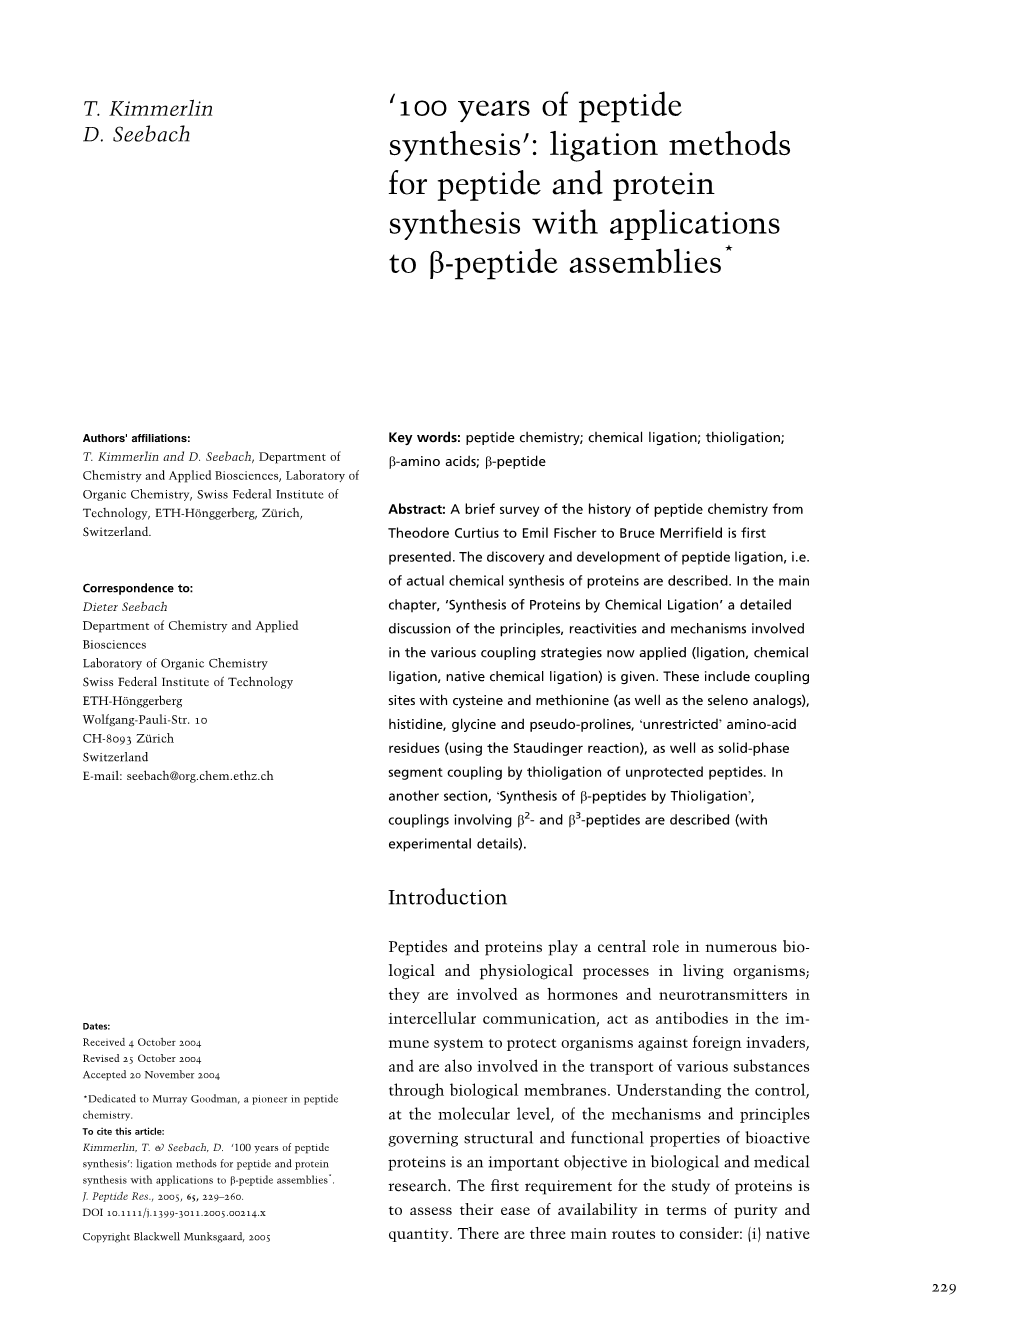 Ligation Methods for Peptide and Protein Synthesis with Applications to B-Peptide Assemblies*